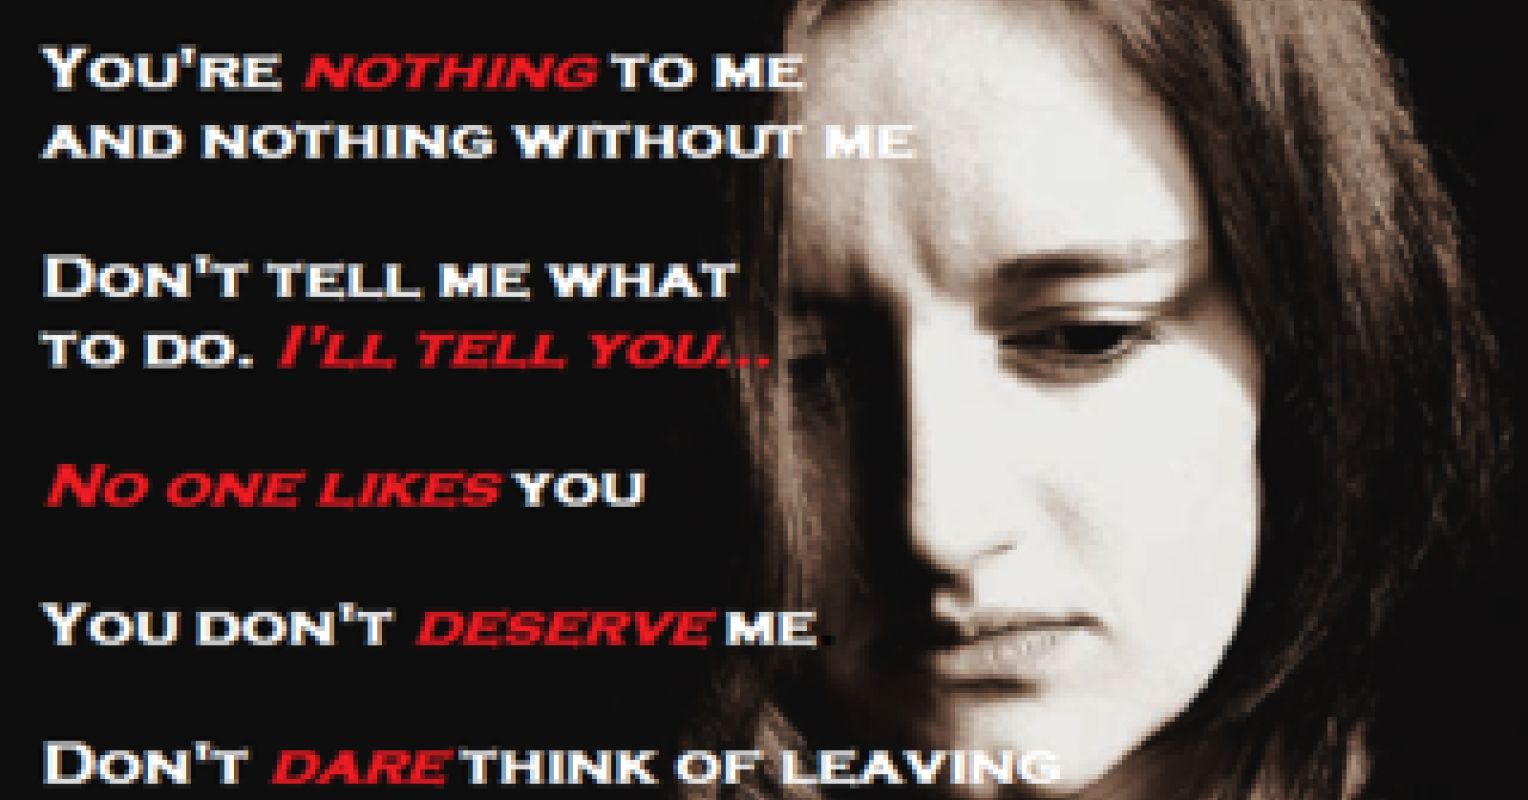 How to Change the Dynamics of an Abusive Relationship | Psychology Today